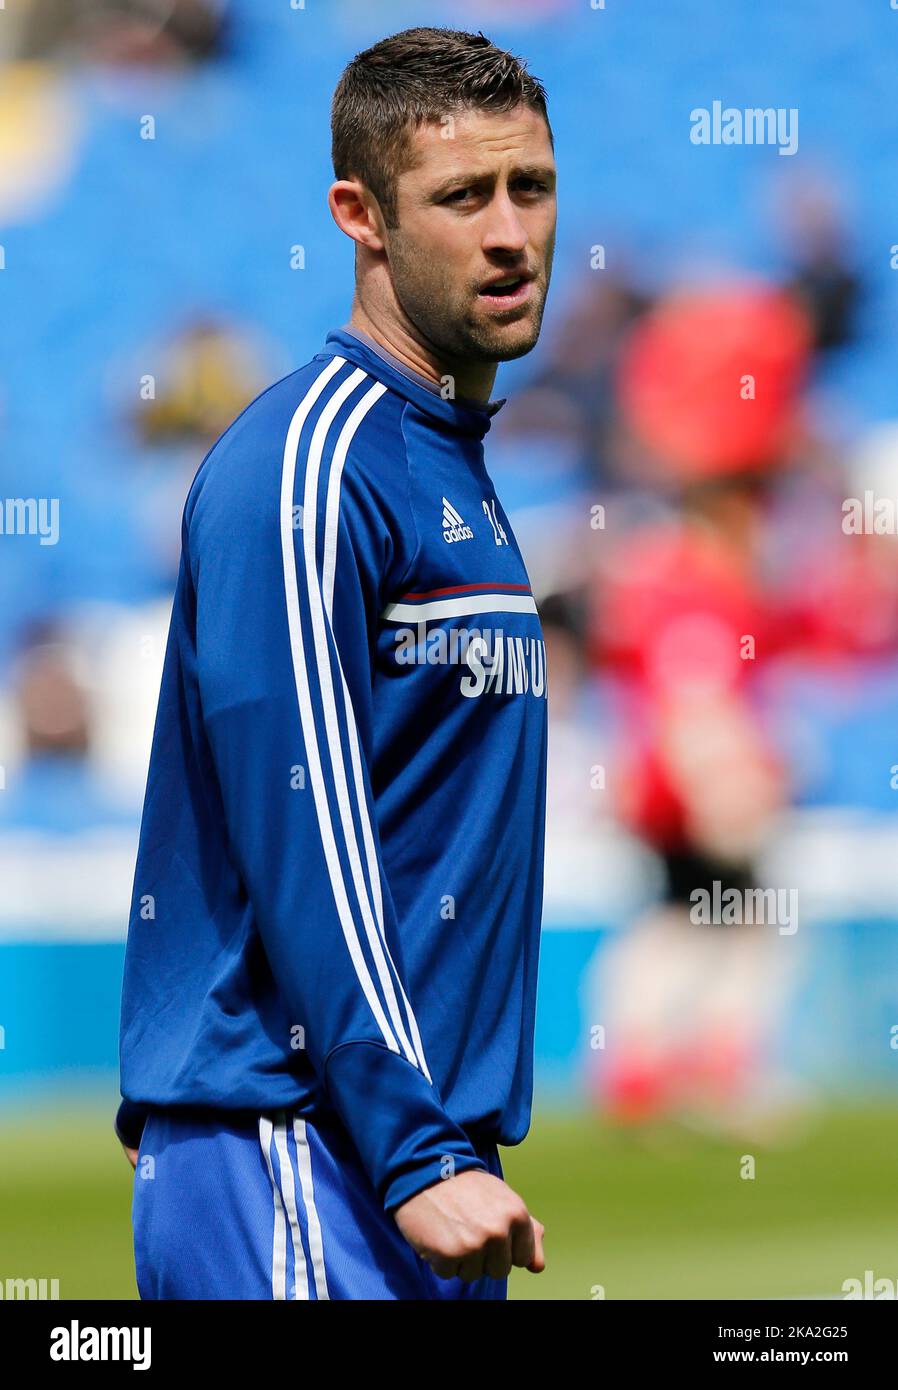 11th May 2014 - Barclays Premier League - Cardiff City v Chelsea - Gary Cahill of Chelsea - Photo: Paul Roberts/Pathos. Stock Photo